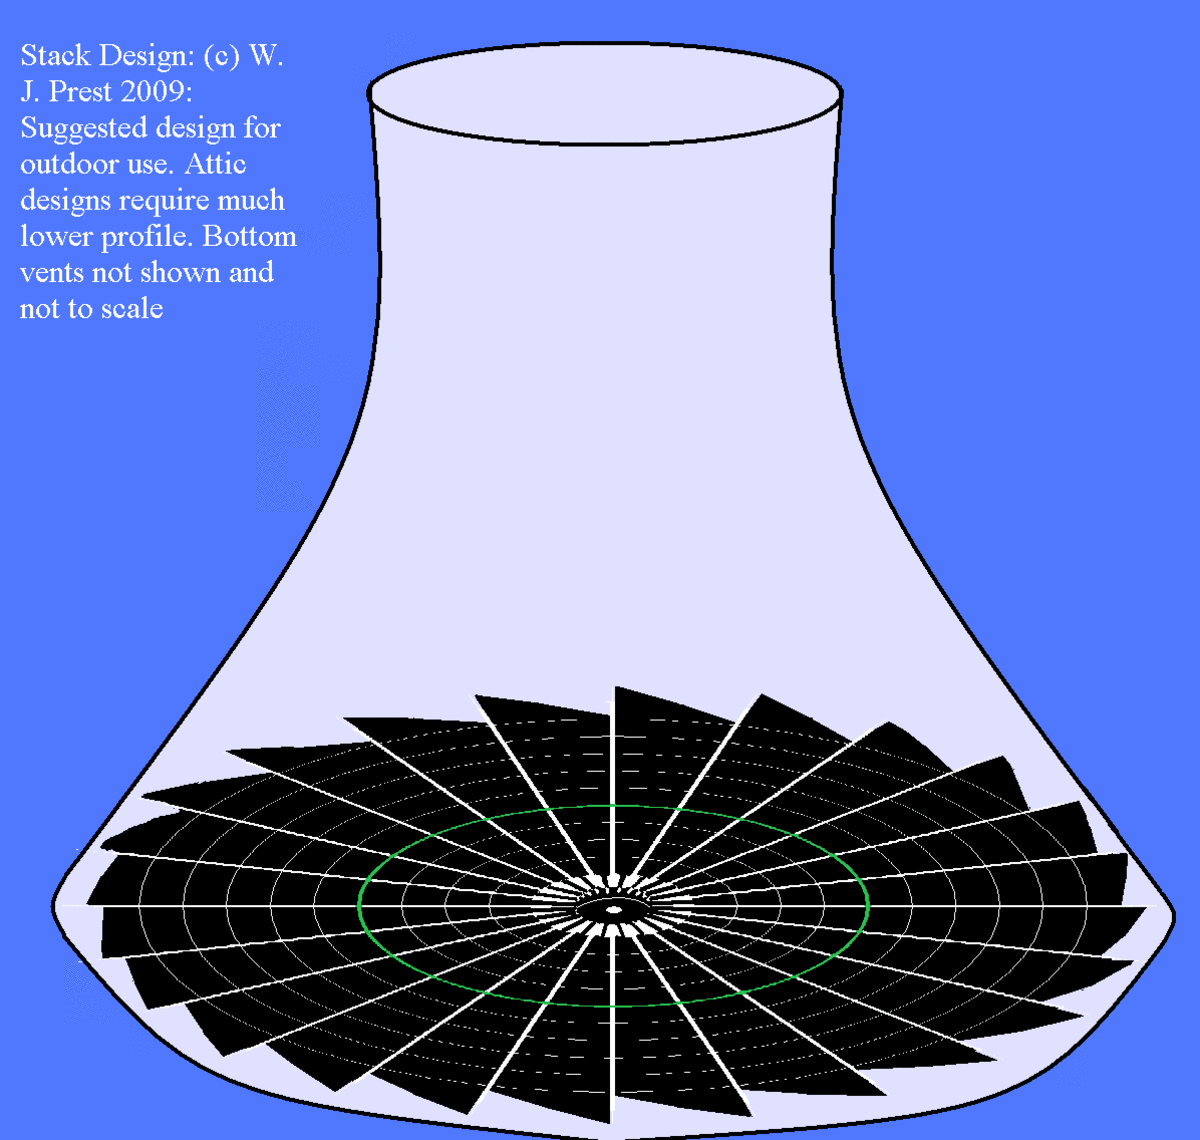 The horizontal fan is placed in a chimney design similar to the cooling towers that one sees in some industrial area. The idea is to create a continuous updraft wind to drive the fan connected to a generator.